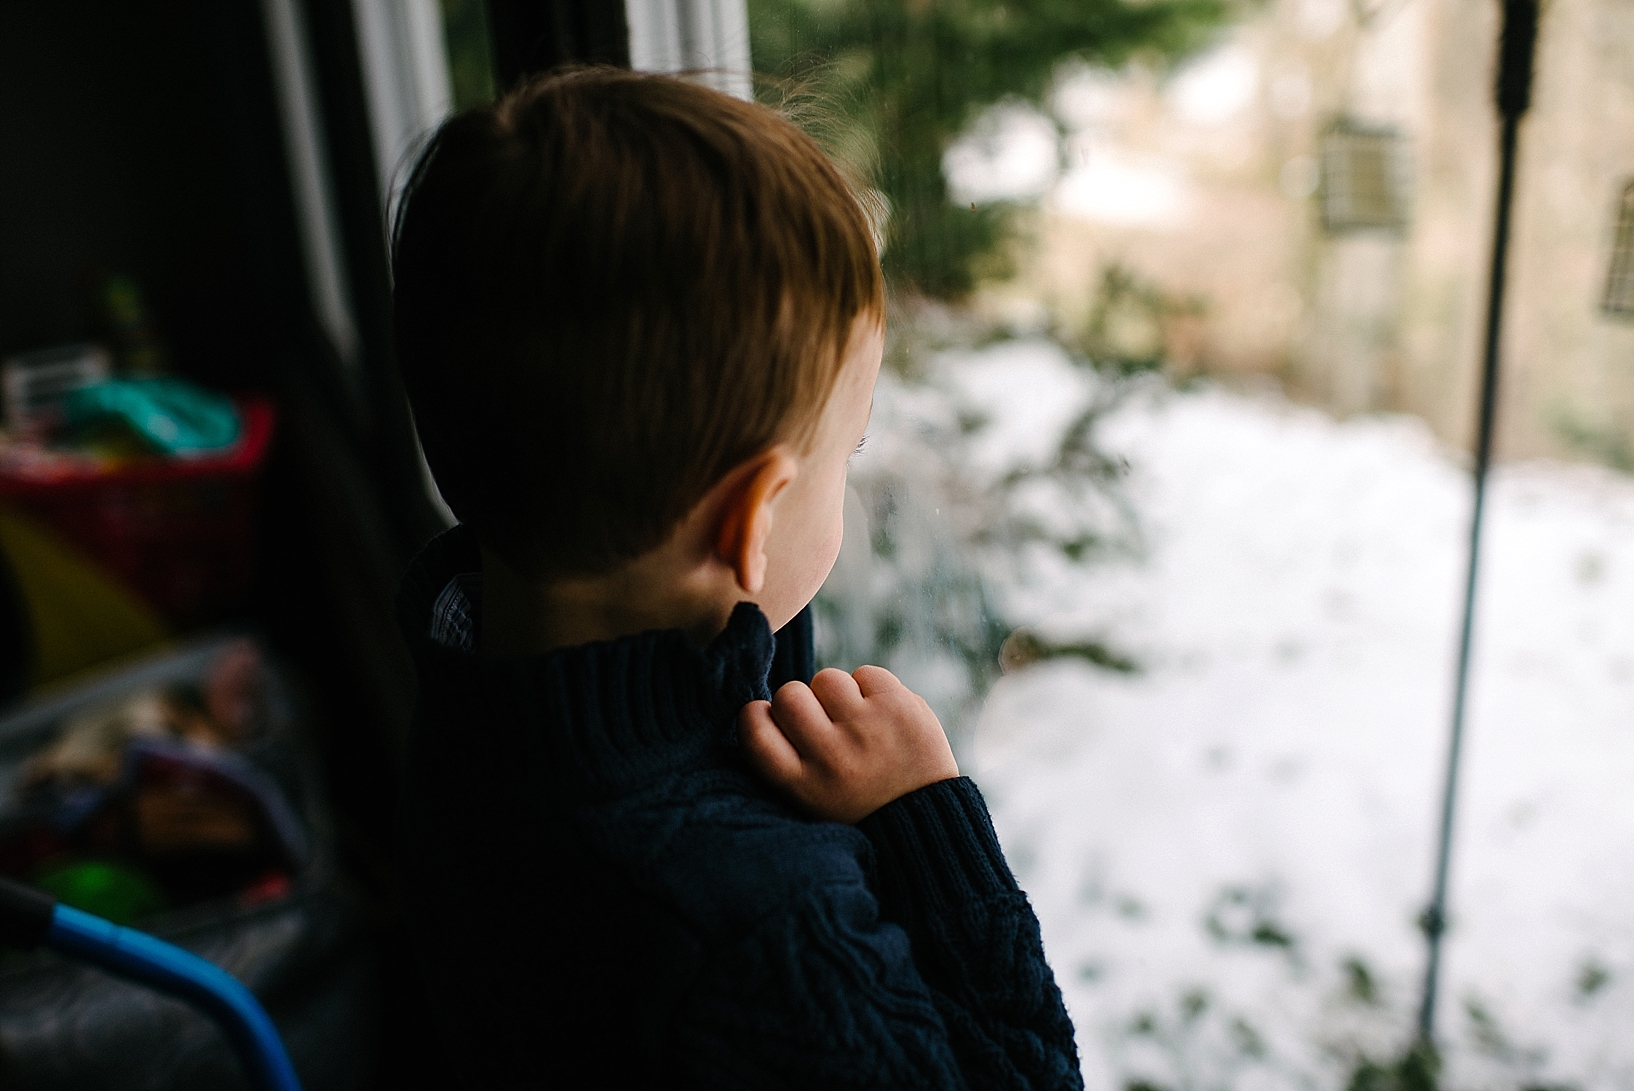 little boy looking outside window with snow on the ground